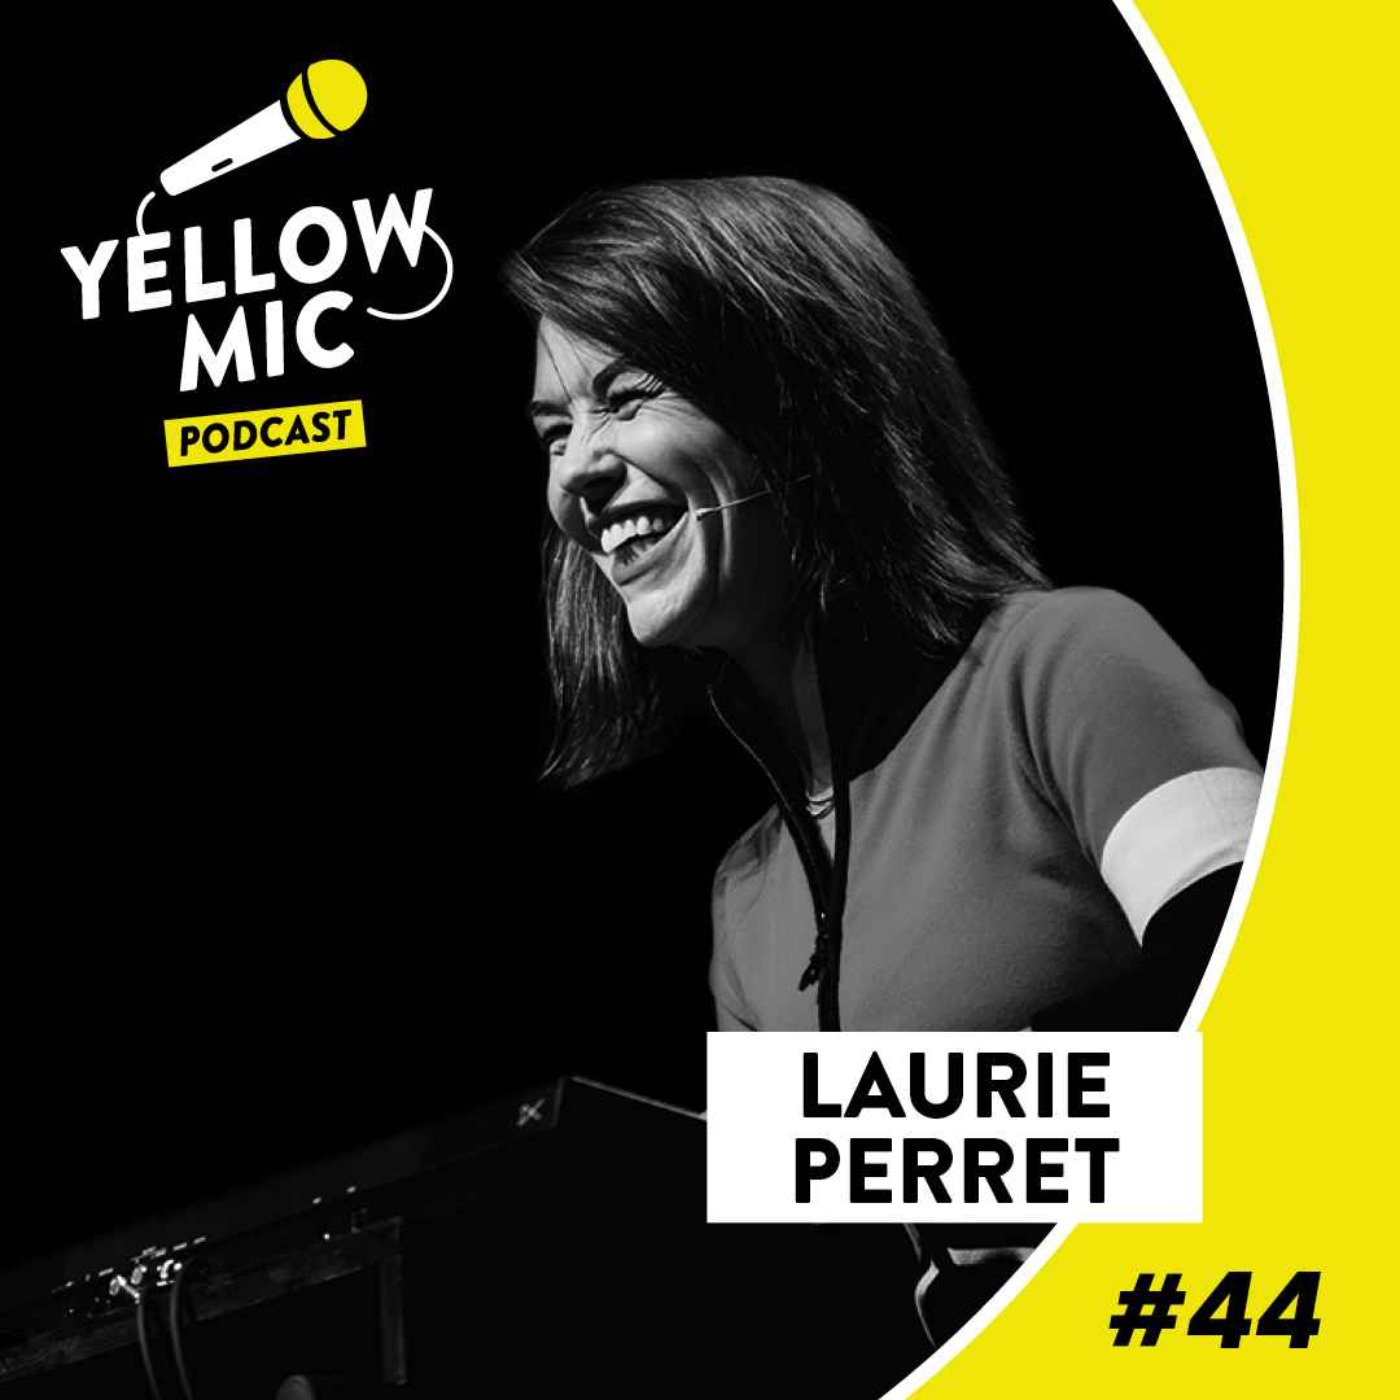 Yellow Mic #44 - Laurie Peret